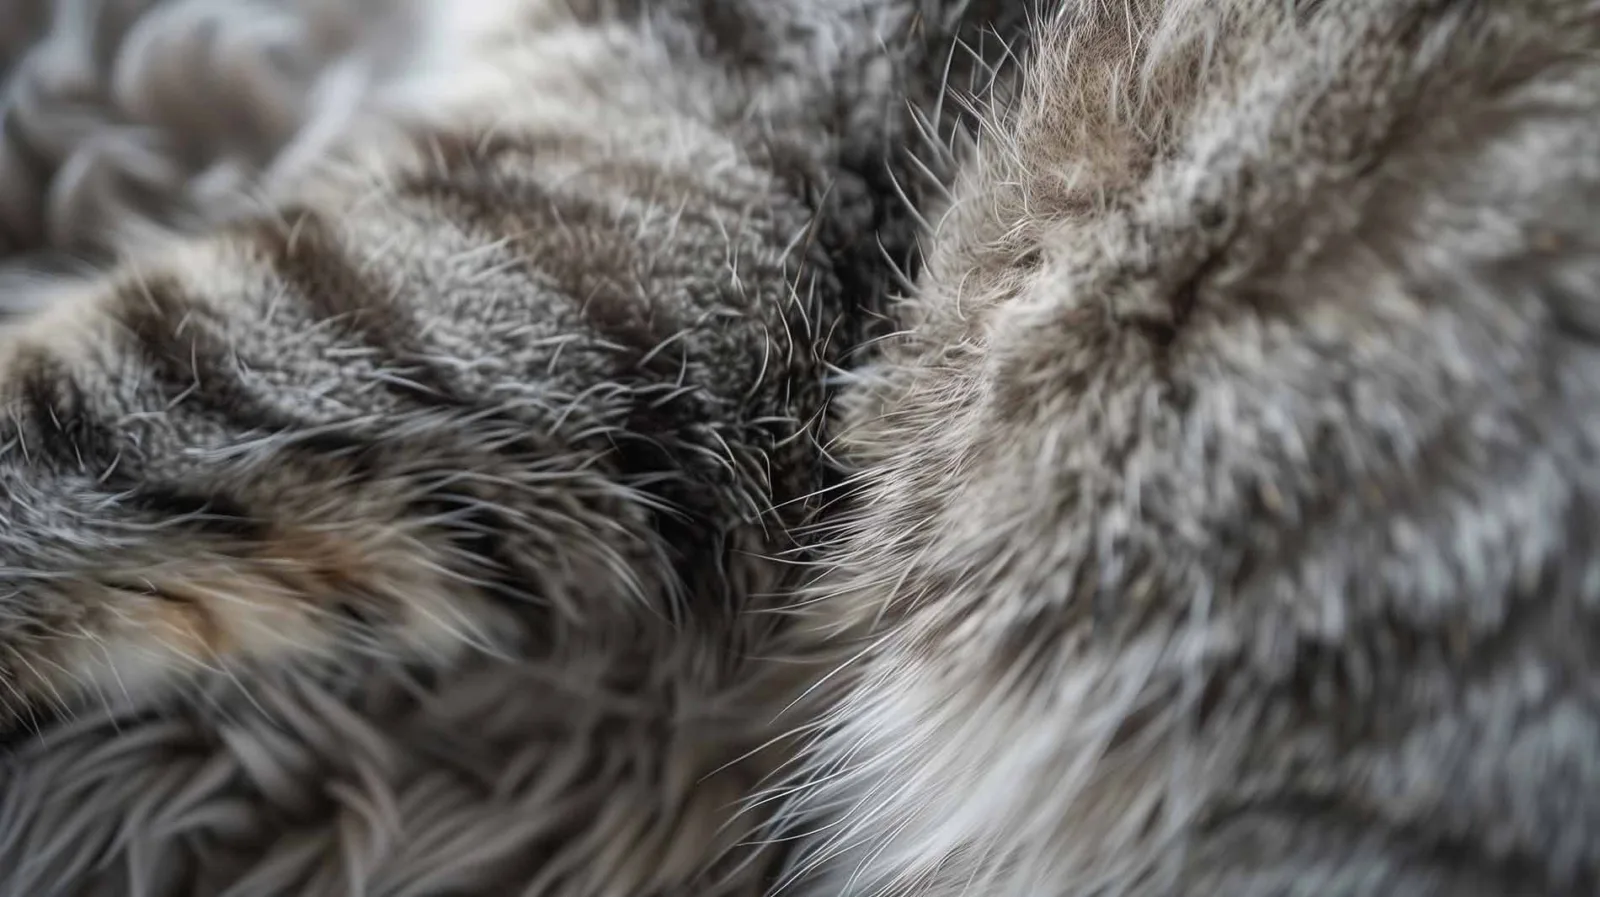 Macro photography of the fur of a gray tabby cat. The fur is a blend of gray and white, with distinct tabby markings that appear as darker stripes and spots against a lighter background. Single hair tips are visible because of their brighter color, poking out of the soft fur.